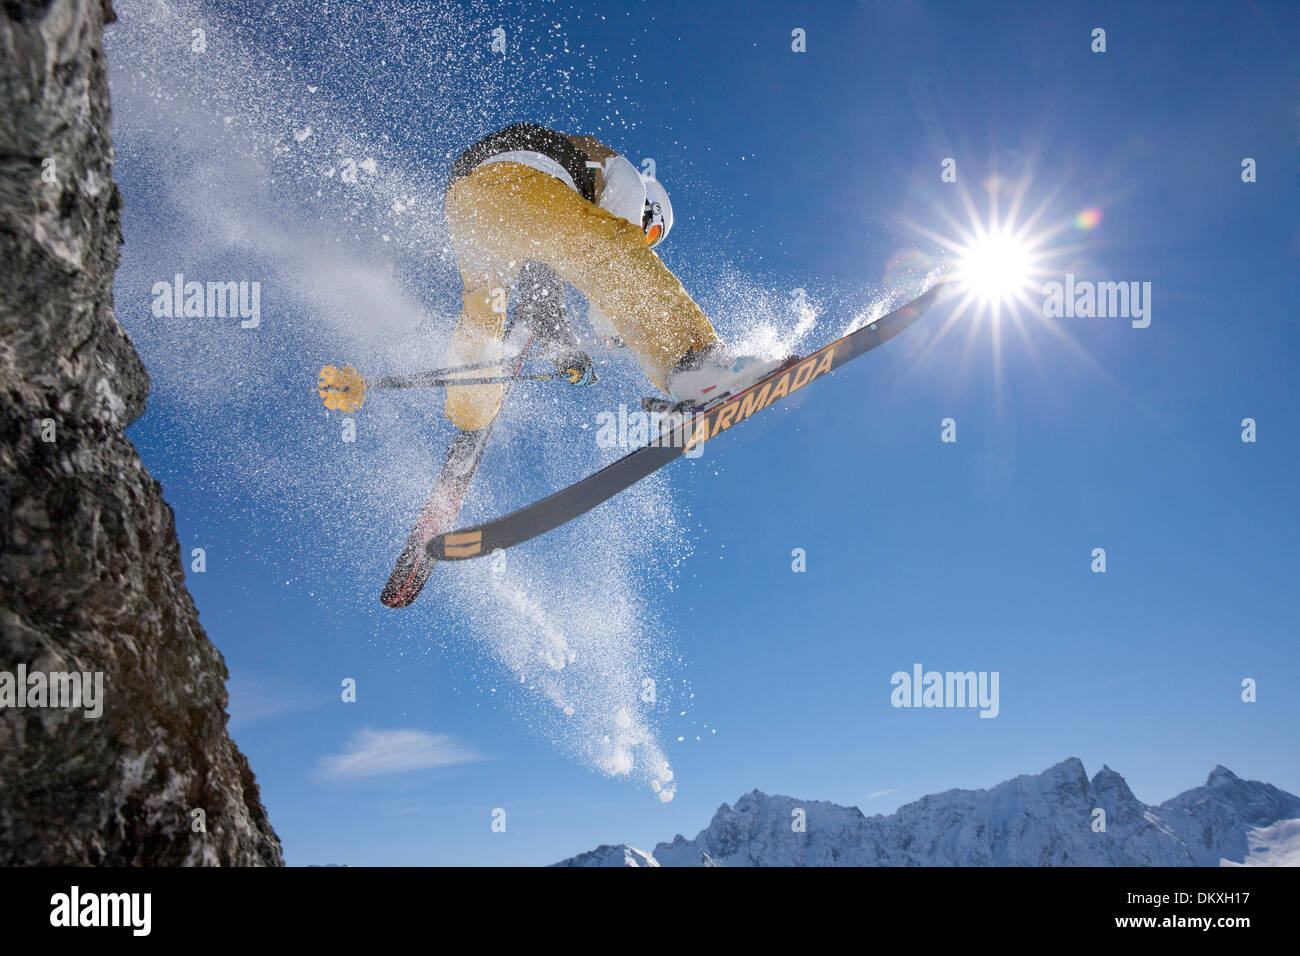 Switzerland Europe sport spare time adventure winter winter sports canton GR Graubünden Grisons ski skiing Carving Carving ski Stock Photo